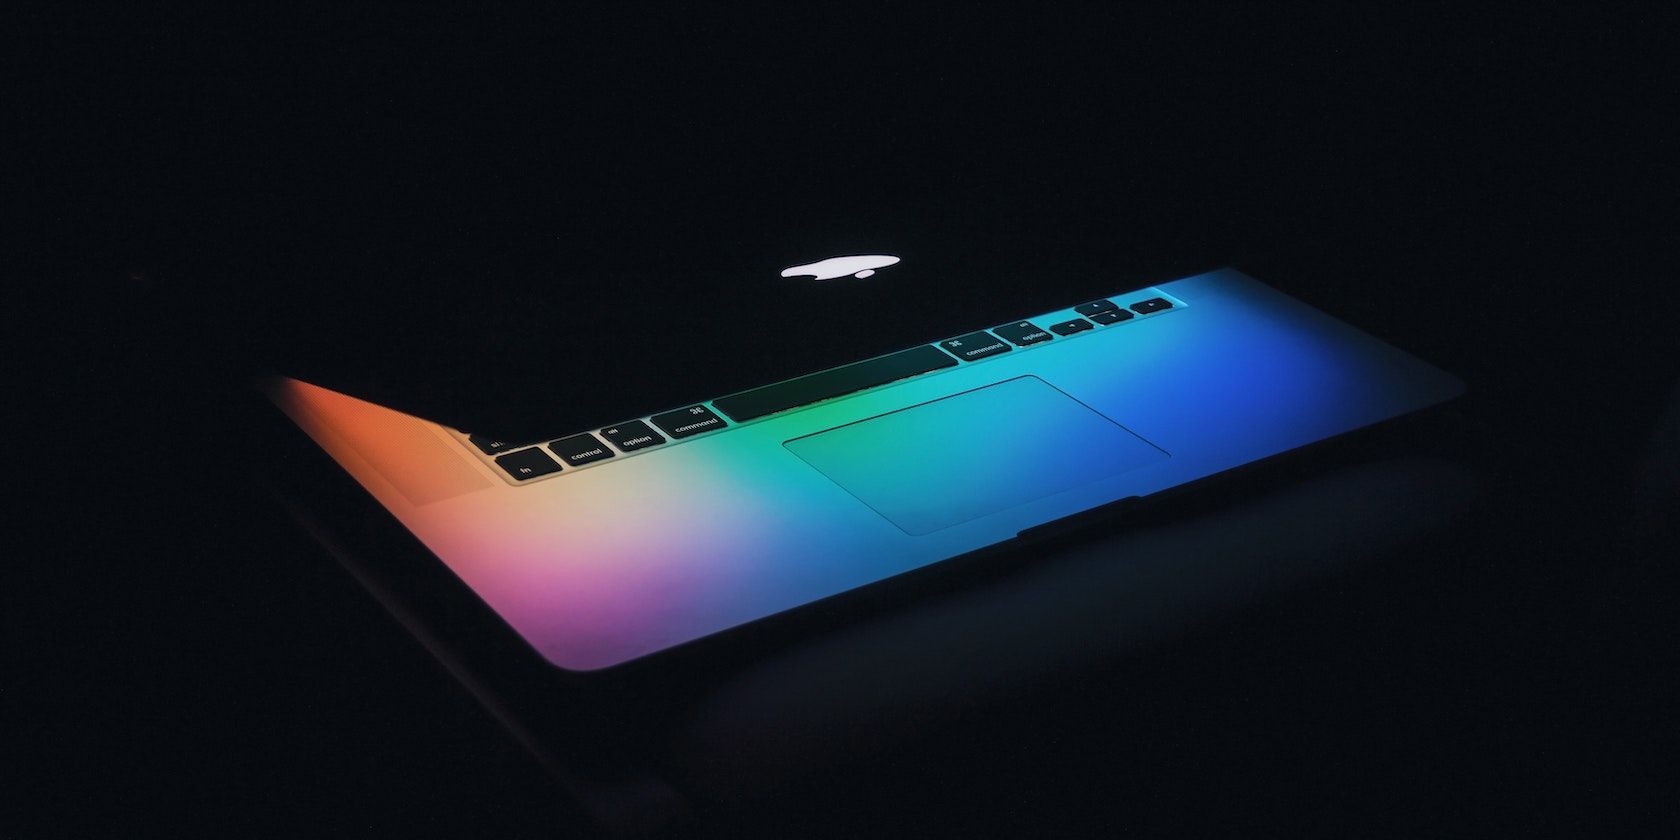 A photo of an Apple Mac computer with its lid partially closed, with a colorful desktop background